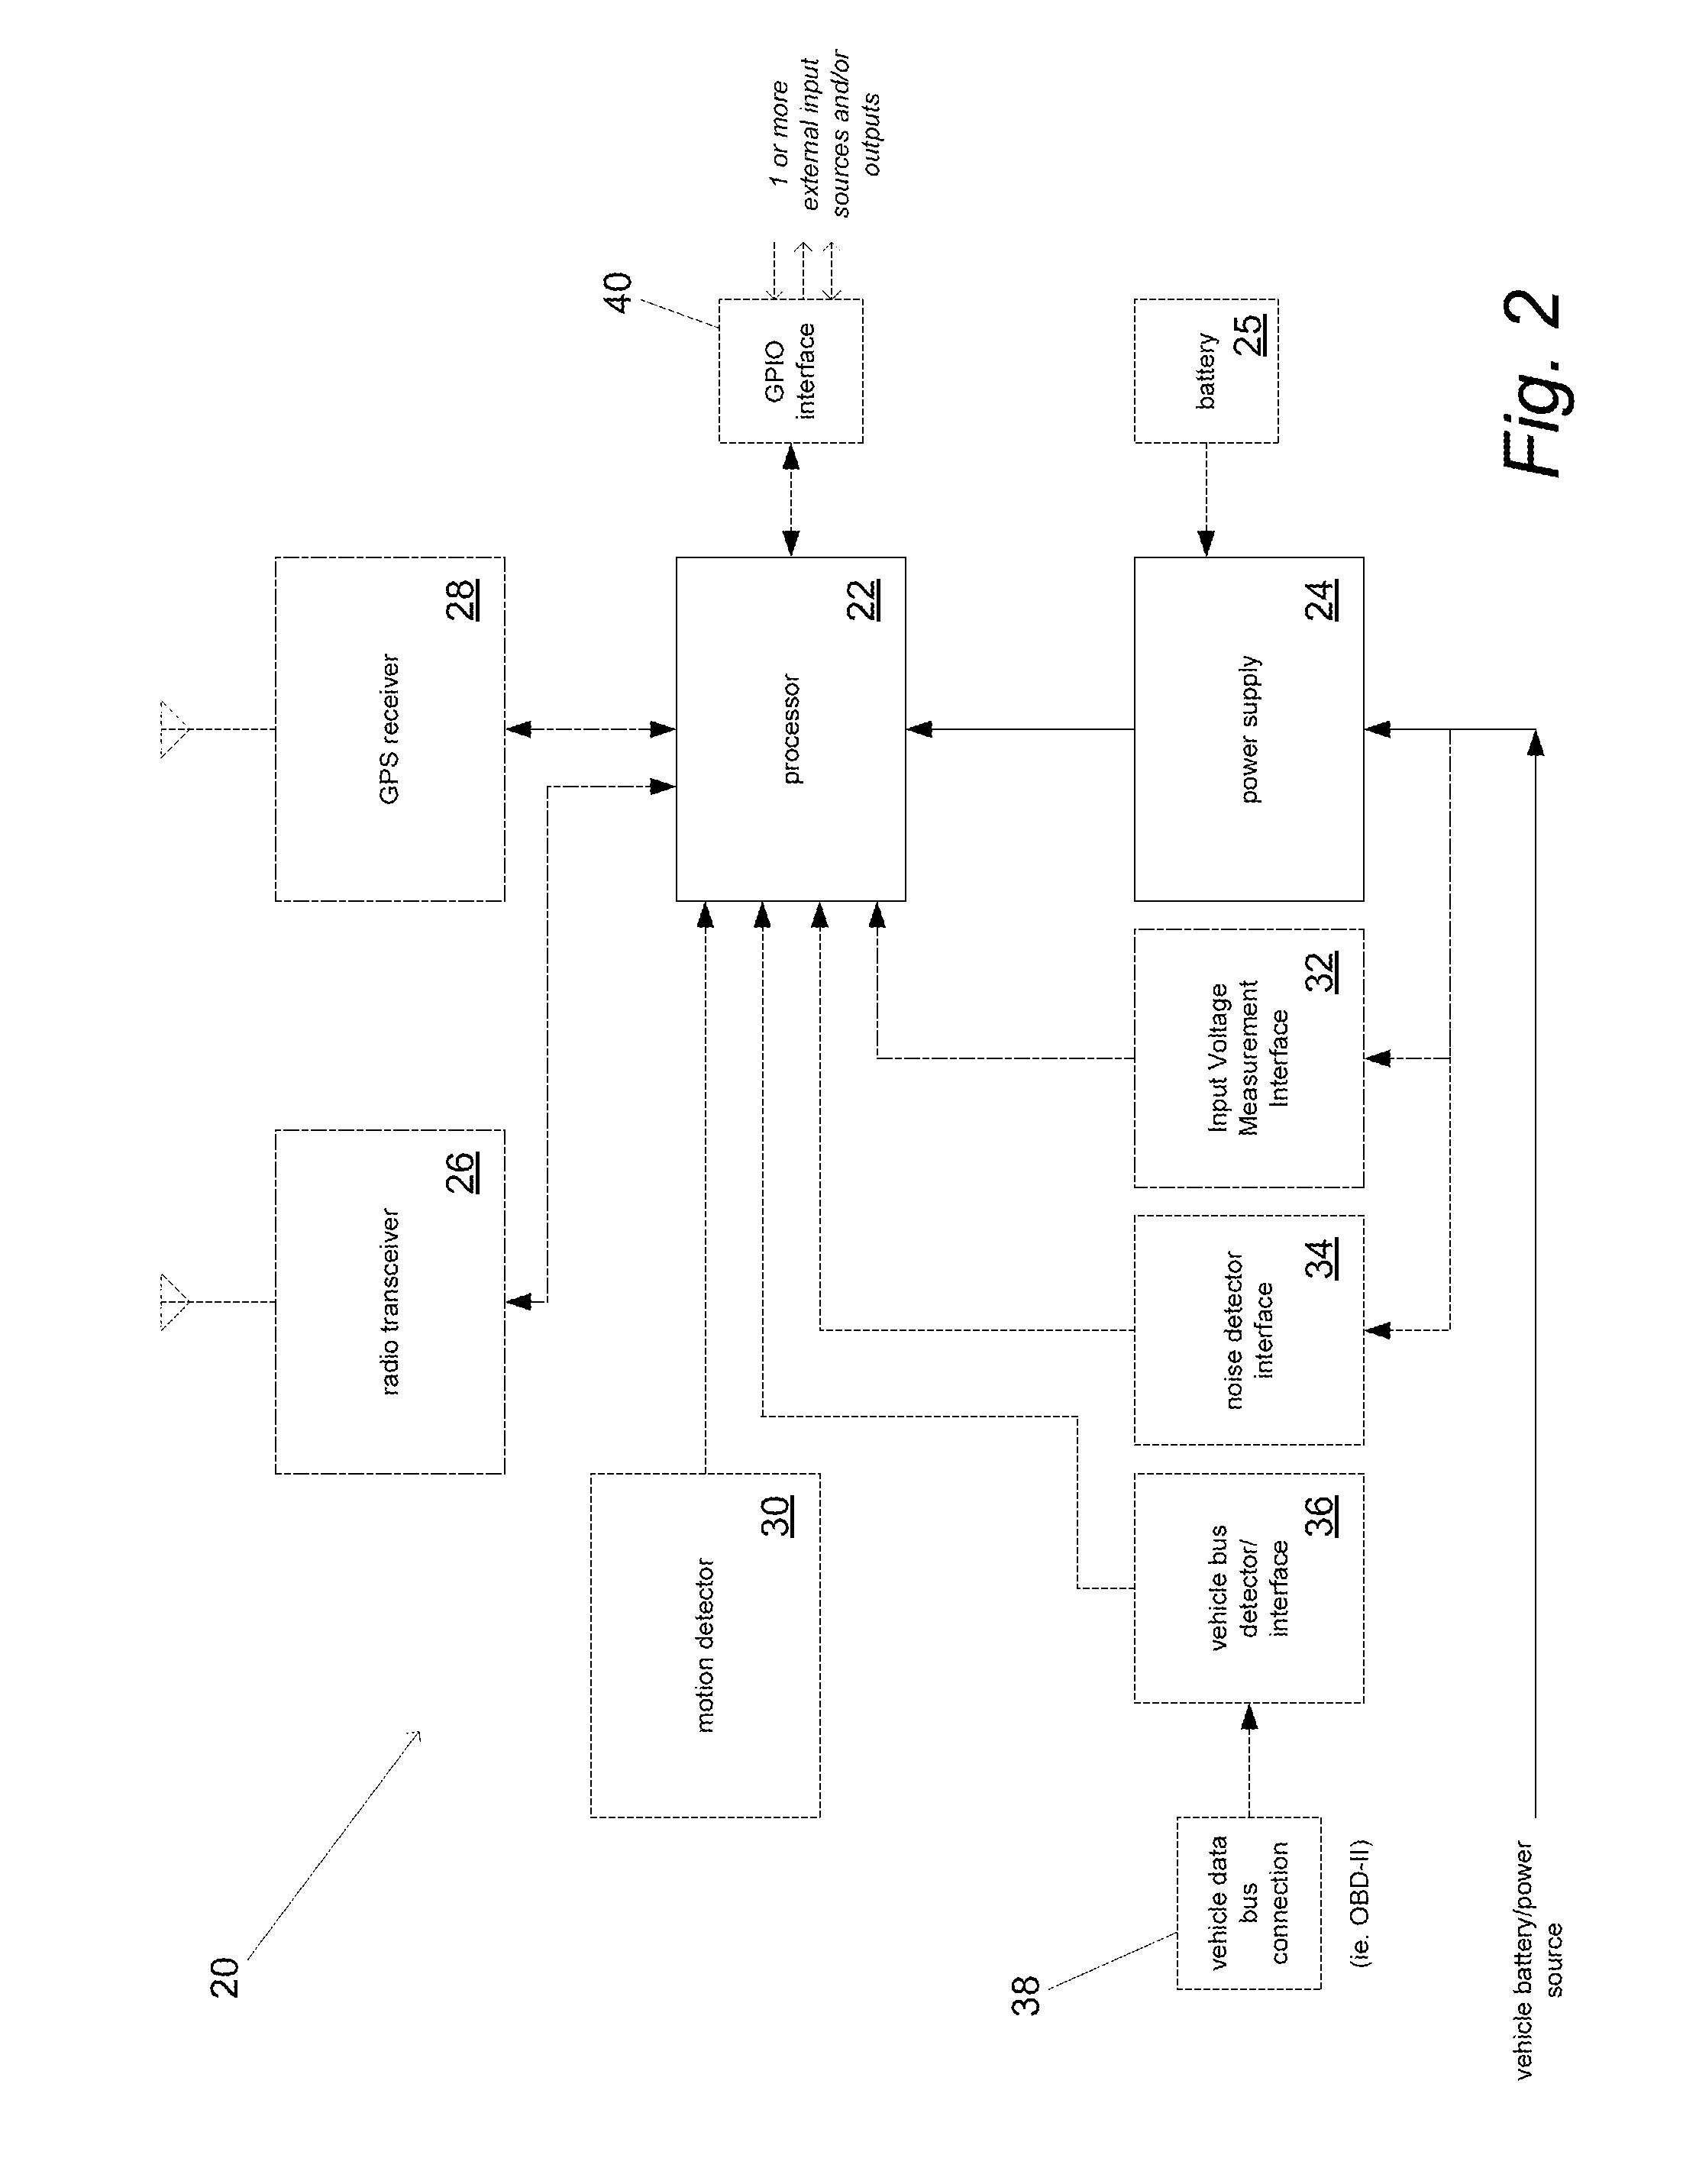 Systems and methods for virtual ignition detection